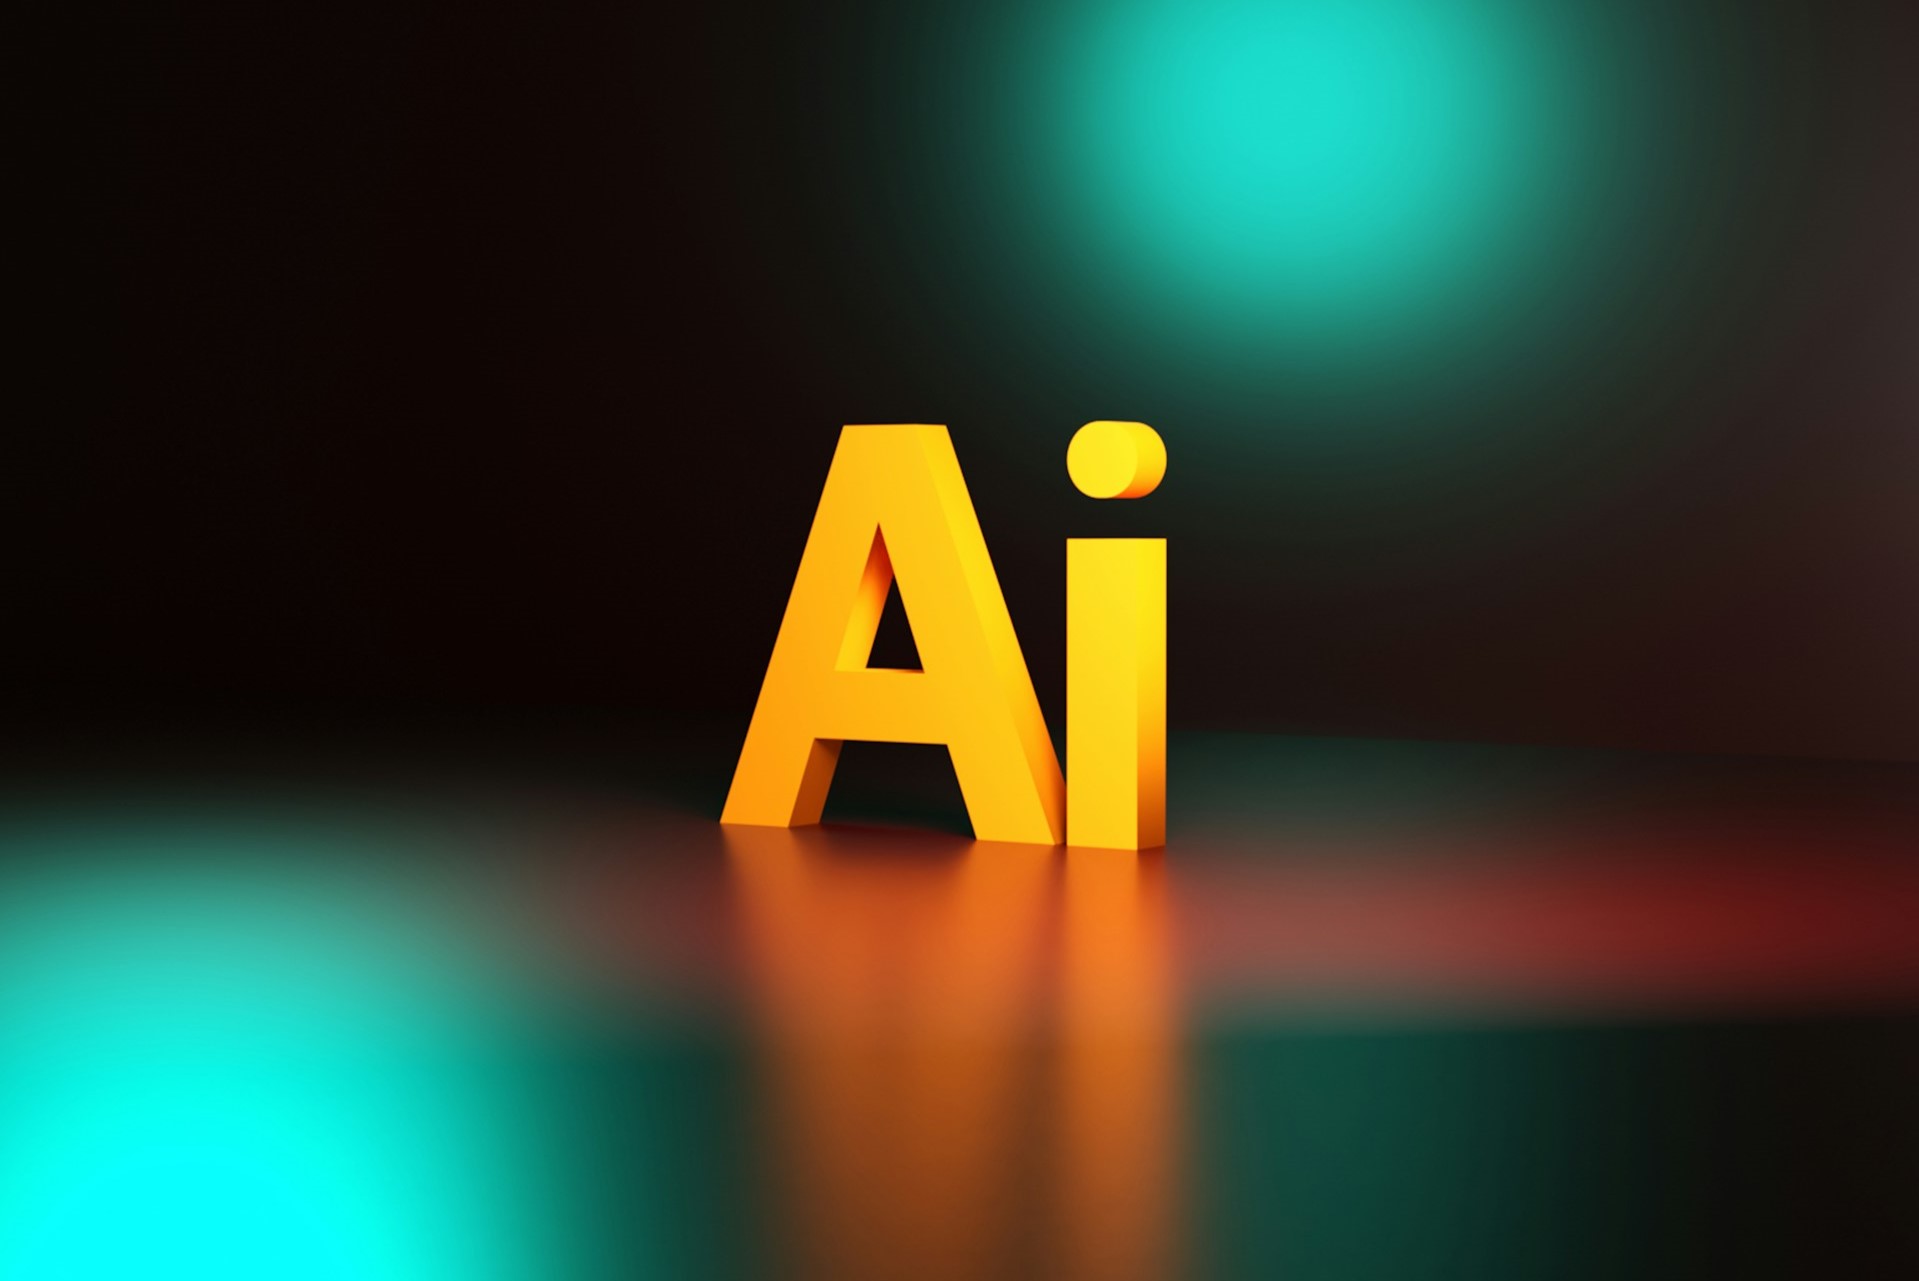 What Is an .AI File? How to Unlock the Power of Adobe for Free